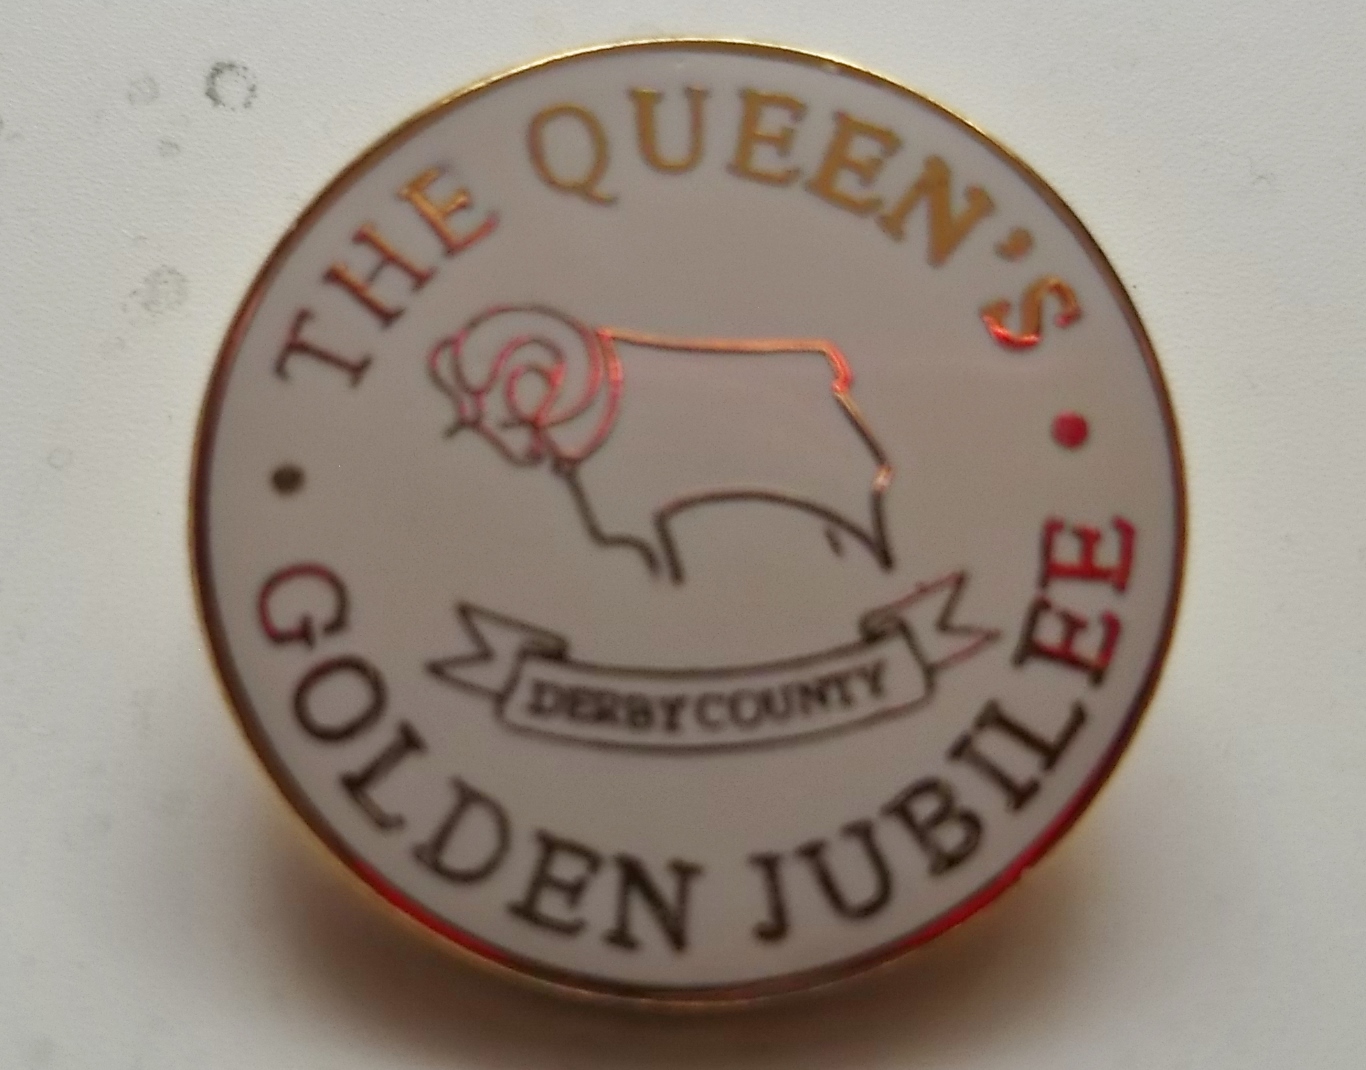 DERBY COUNTY - THE QUEENS JUBILEE 2003 BADGE